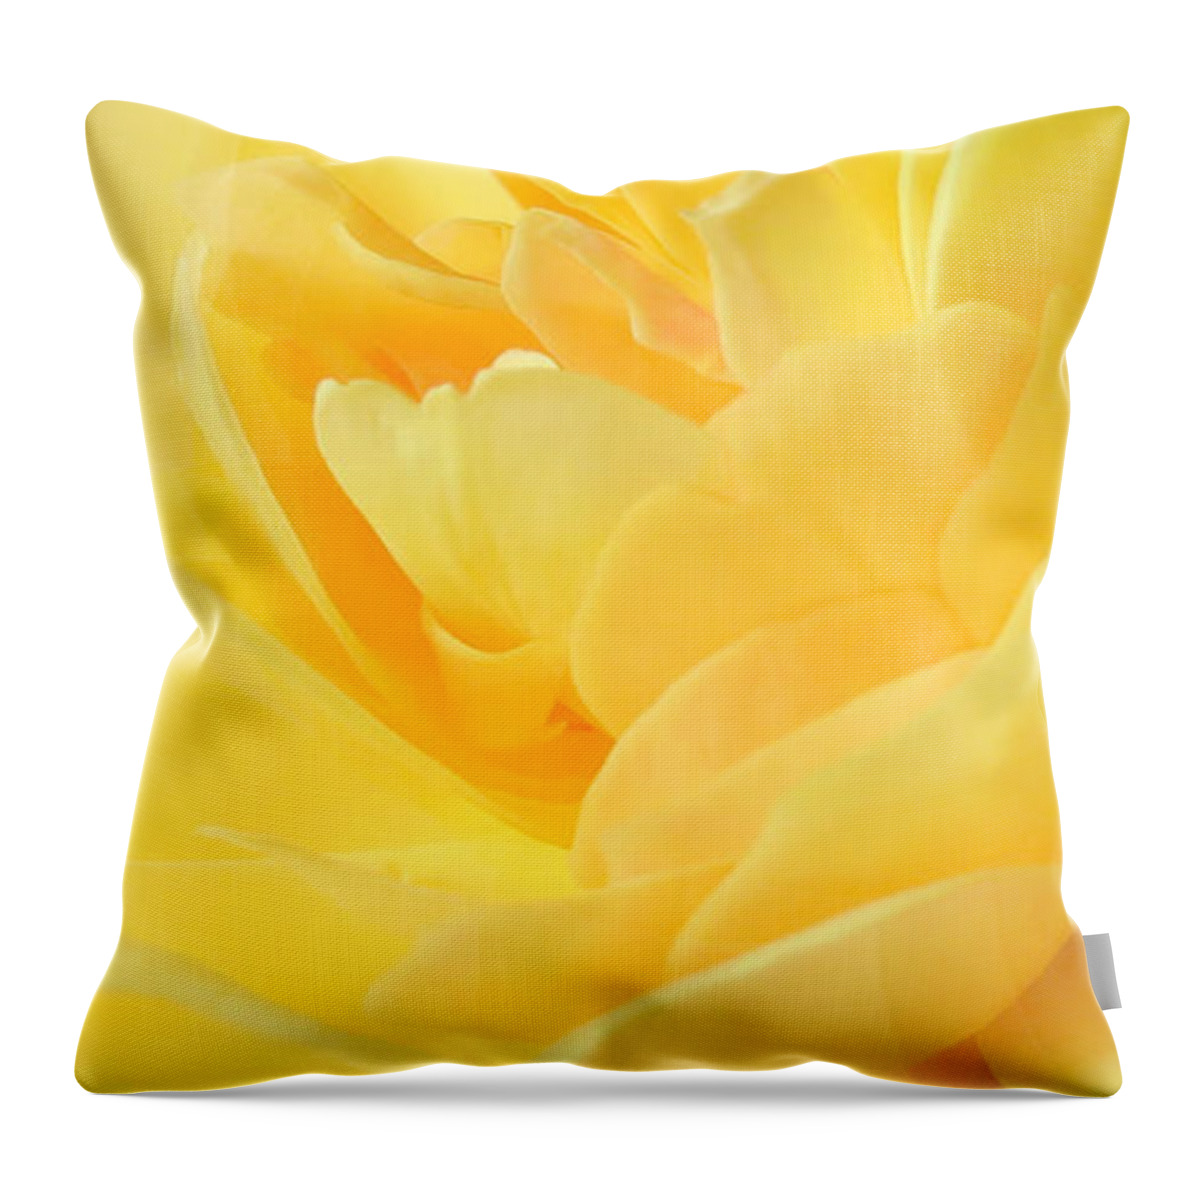 Rose Throw Pillow featuring the photograph Soft Yellow Rose by Deborah Smith